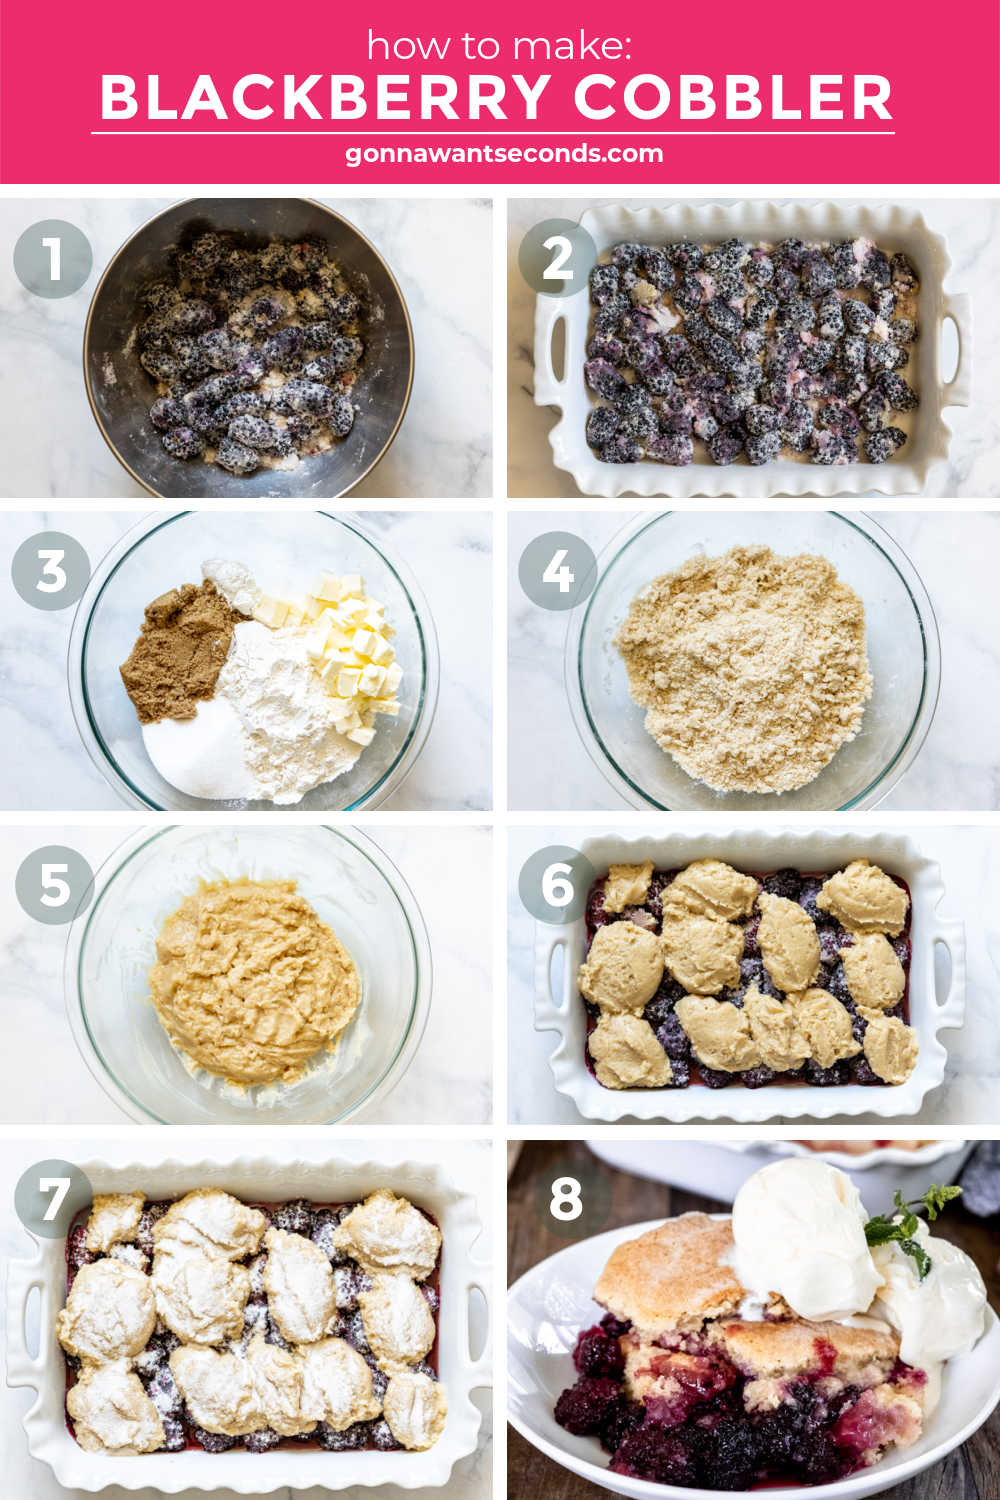 step by step how to make how to make blackberry cobbler